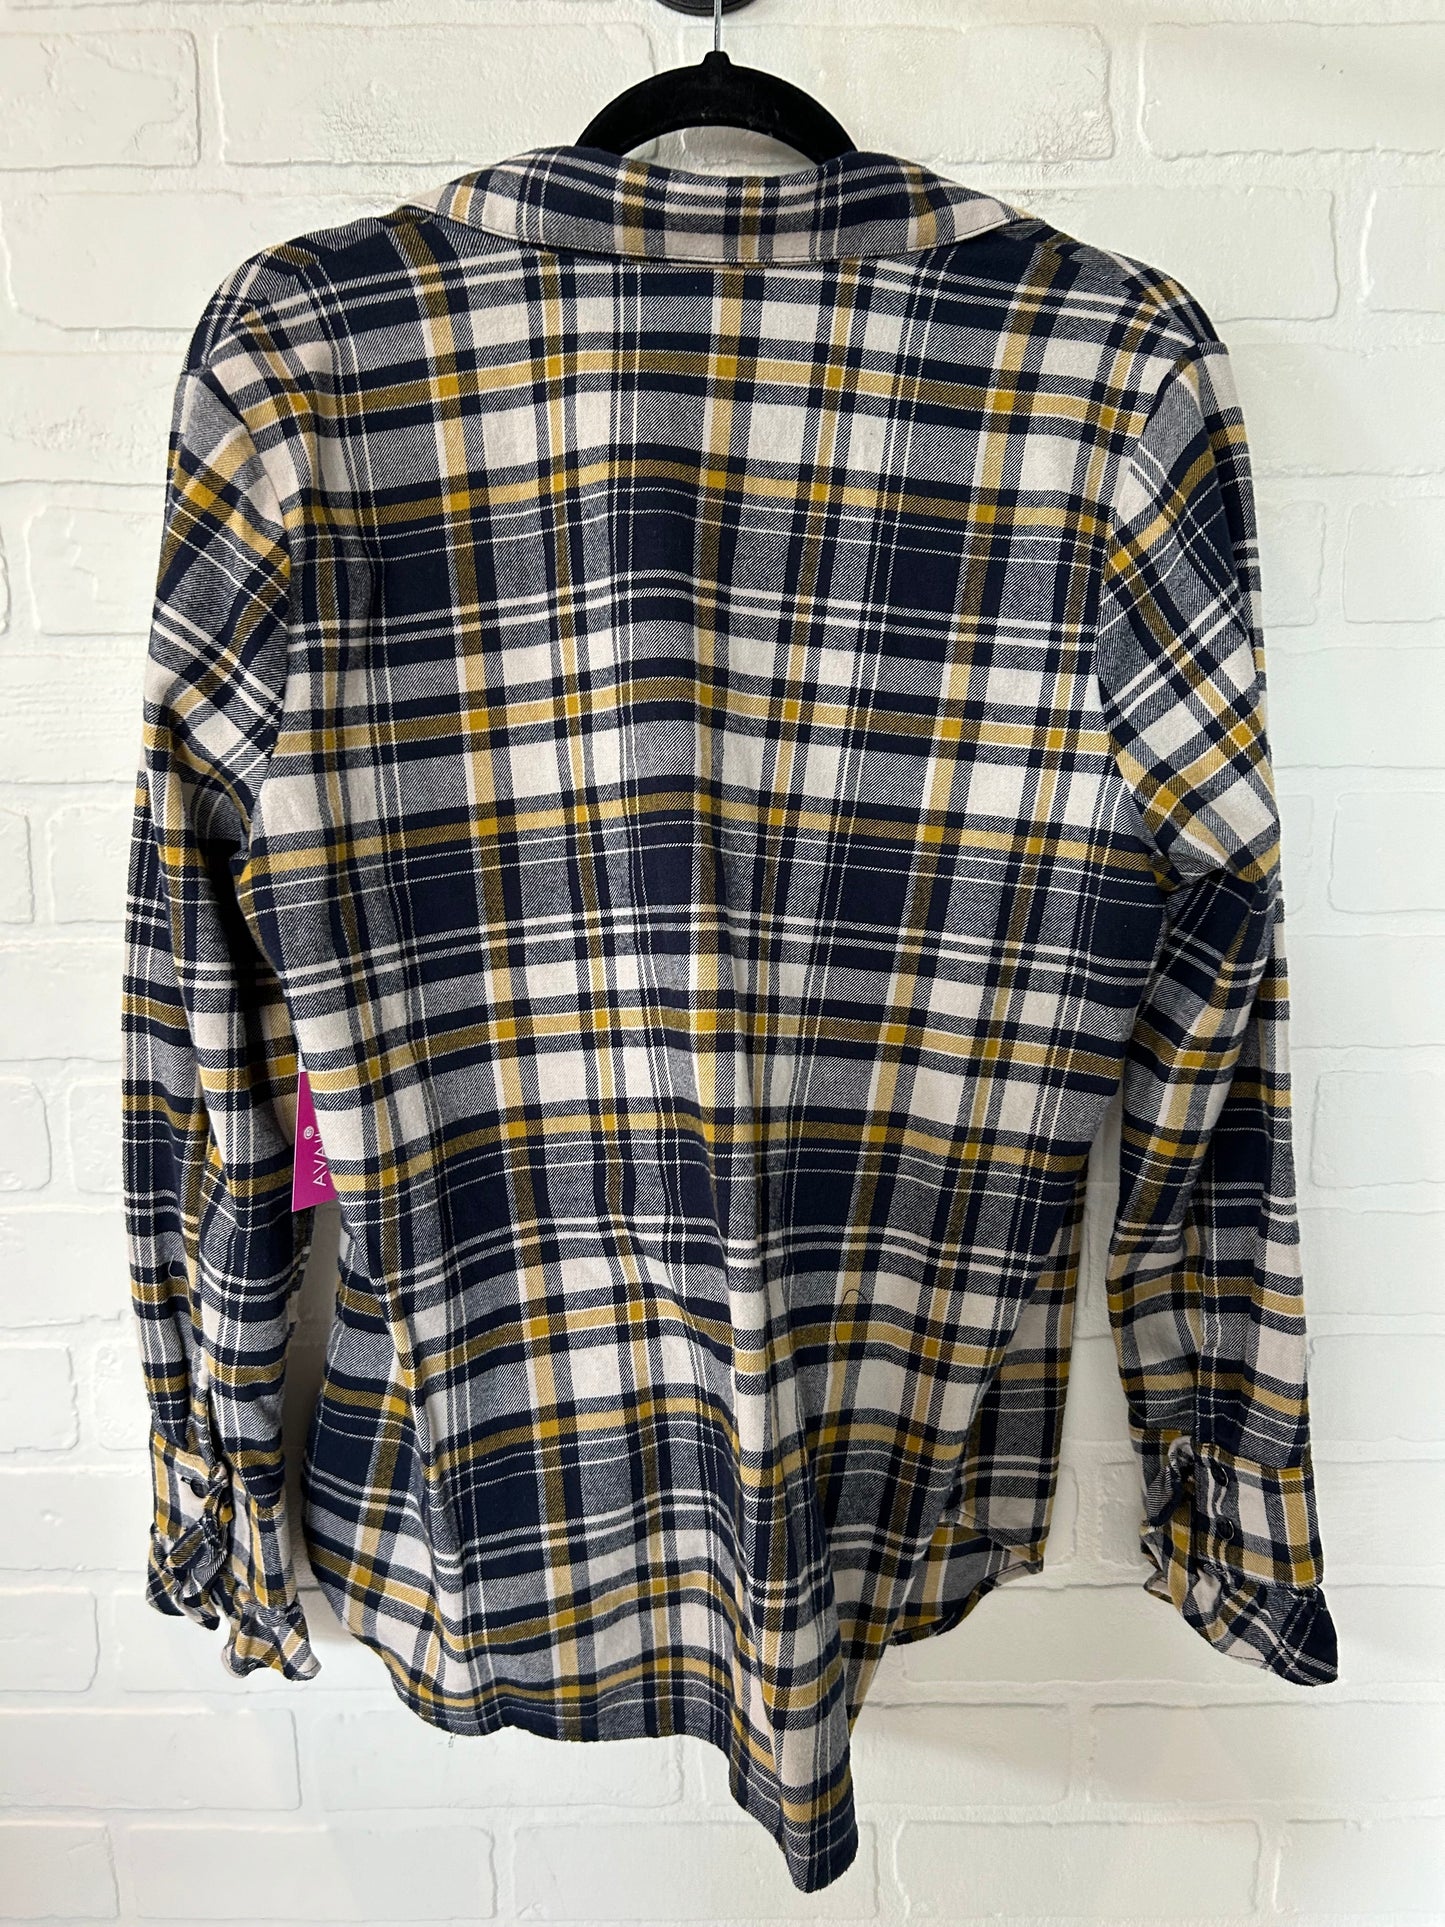 Blue & Yellow Top Long Sleeve Cabi, Size M